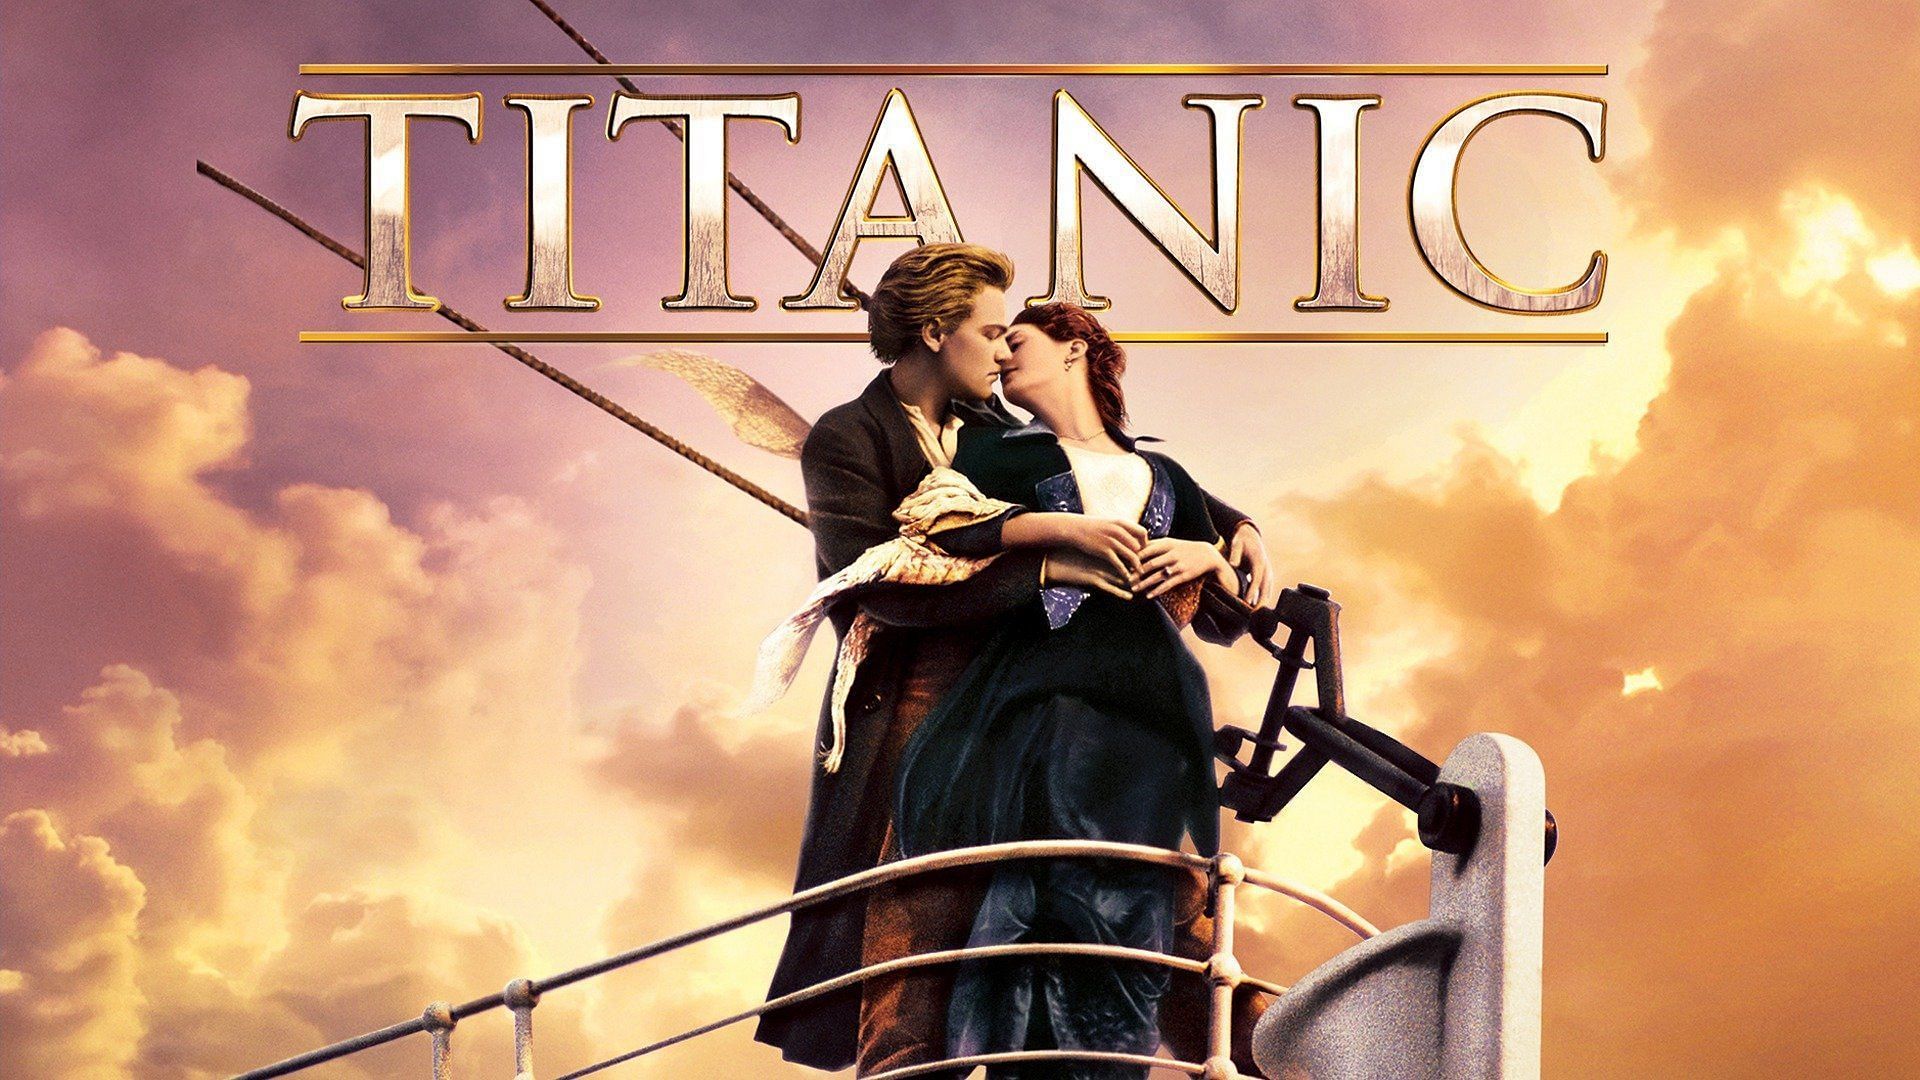 Titanic' Will Return To Theaters In 4K For Its 25th Anniversary